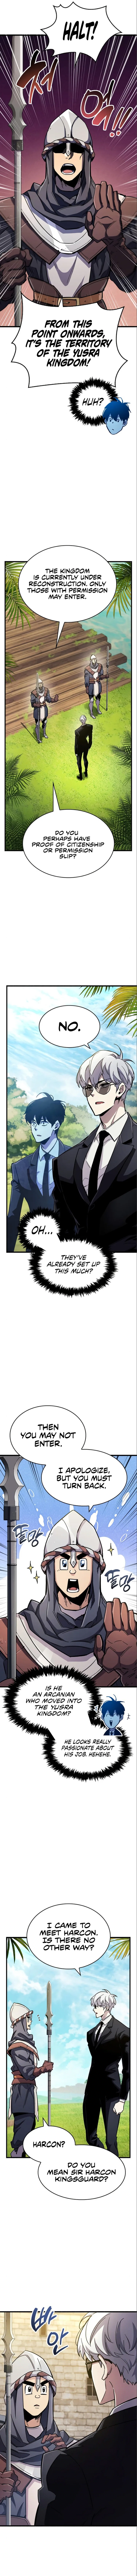 The Player Hides His Past - Chapter 33 Page 8